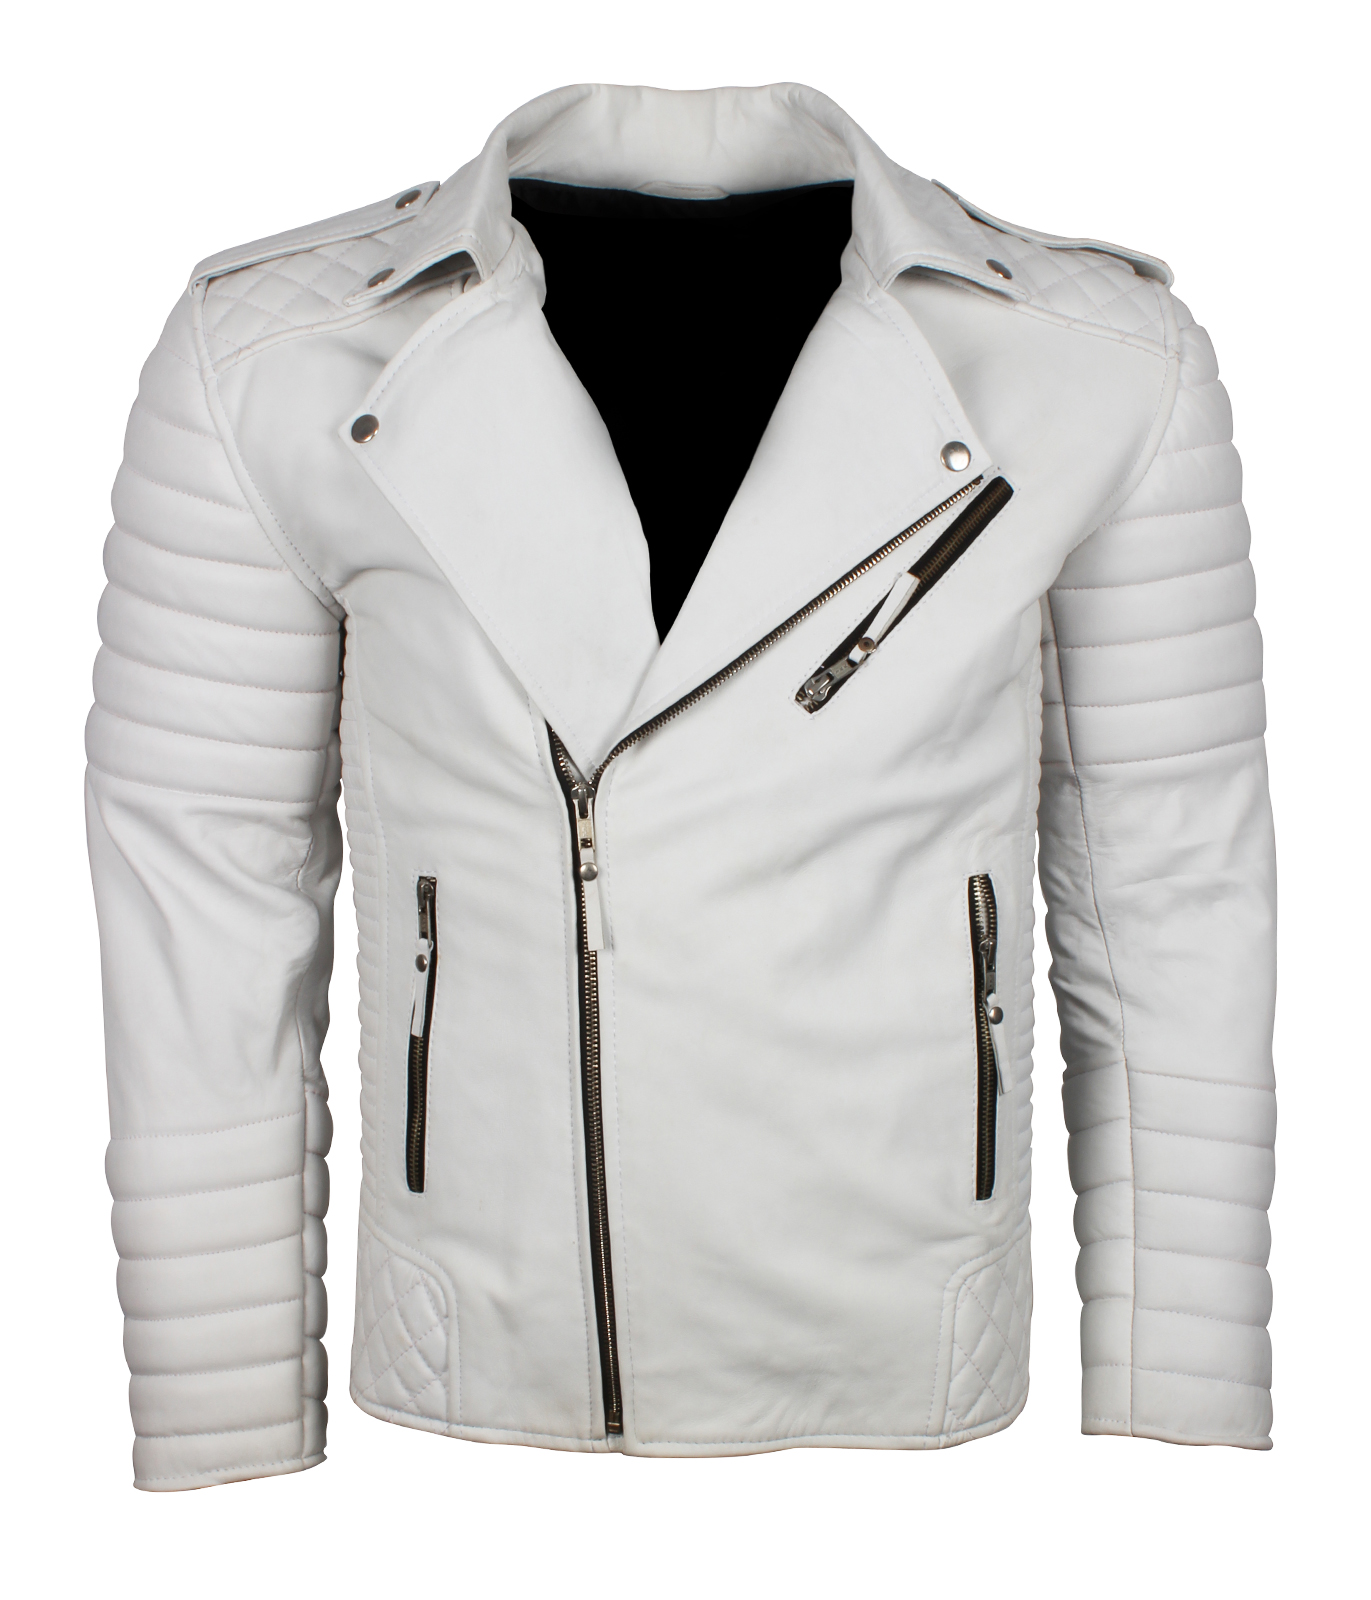 Mens White Leather Jacket Boda Biker For Motorcycle Riders